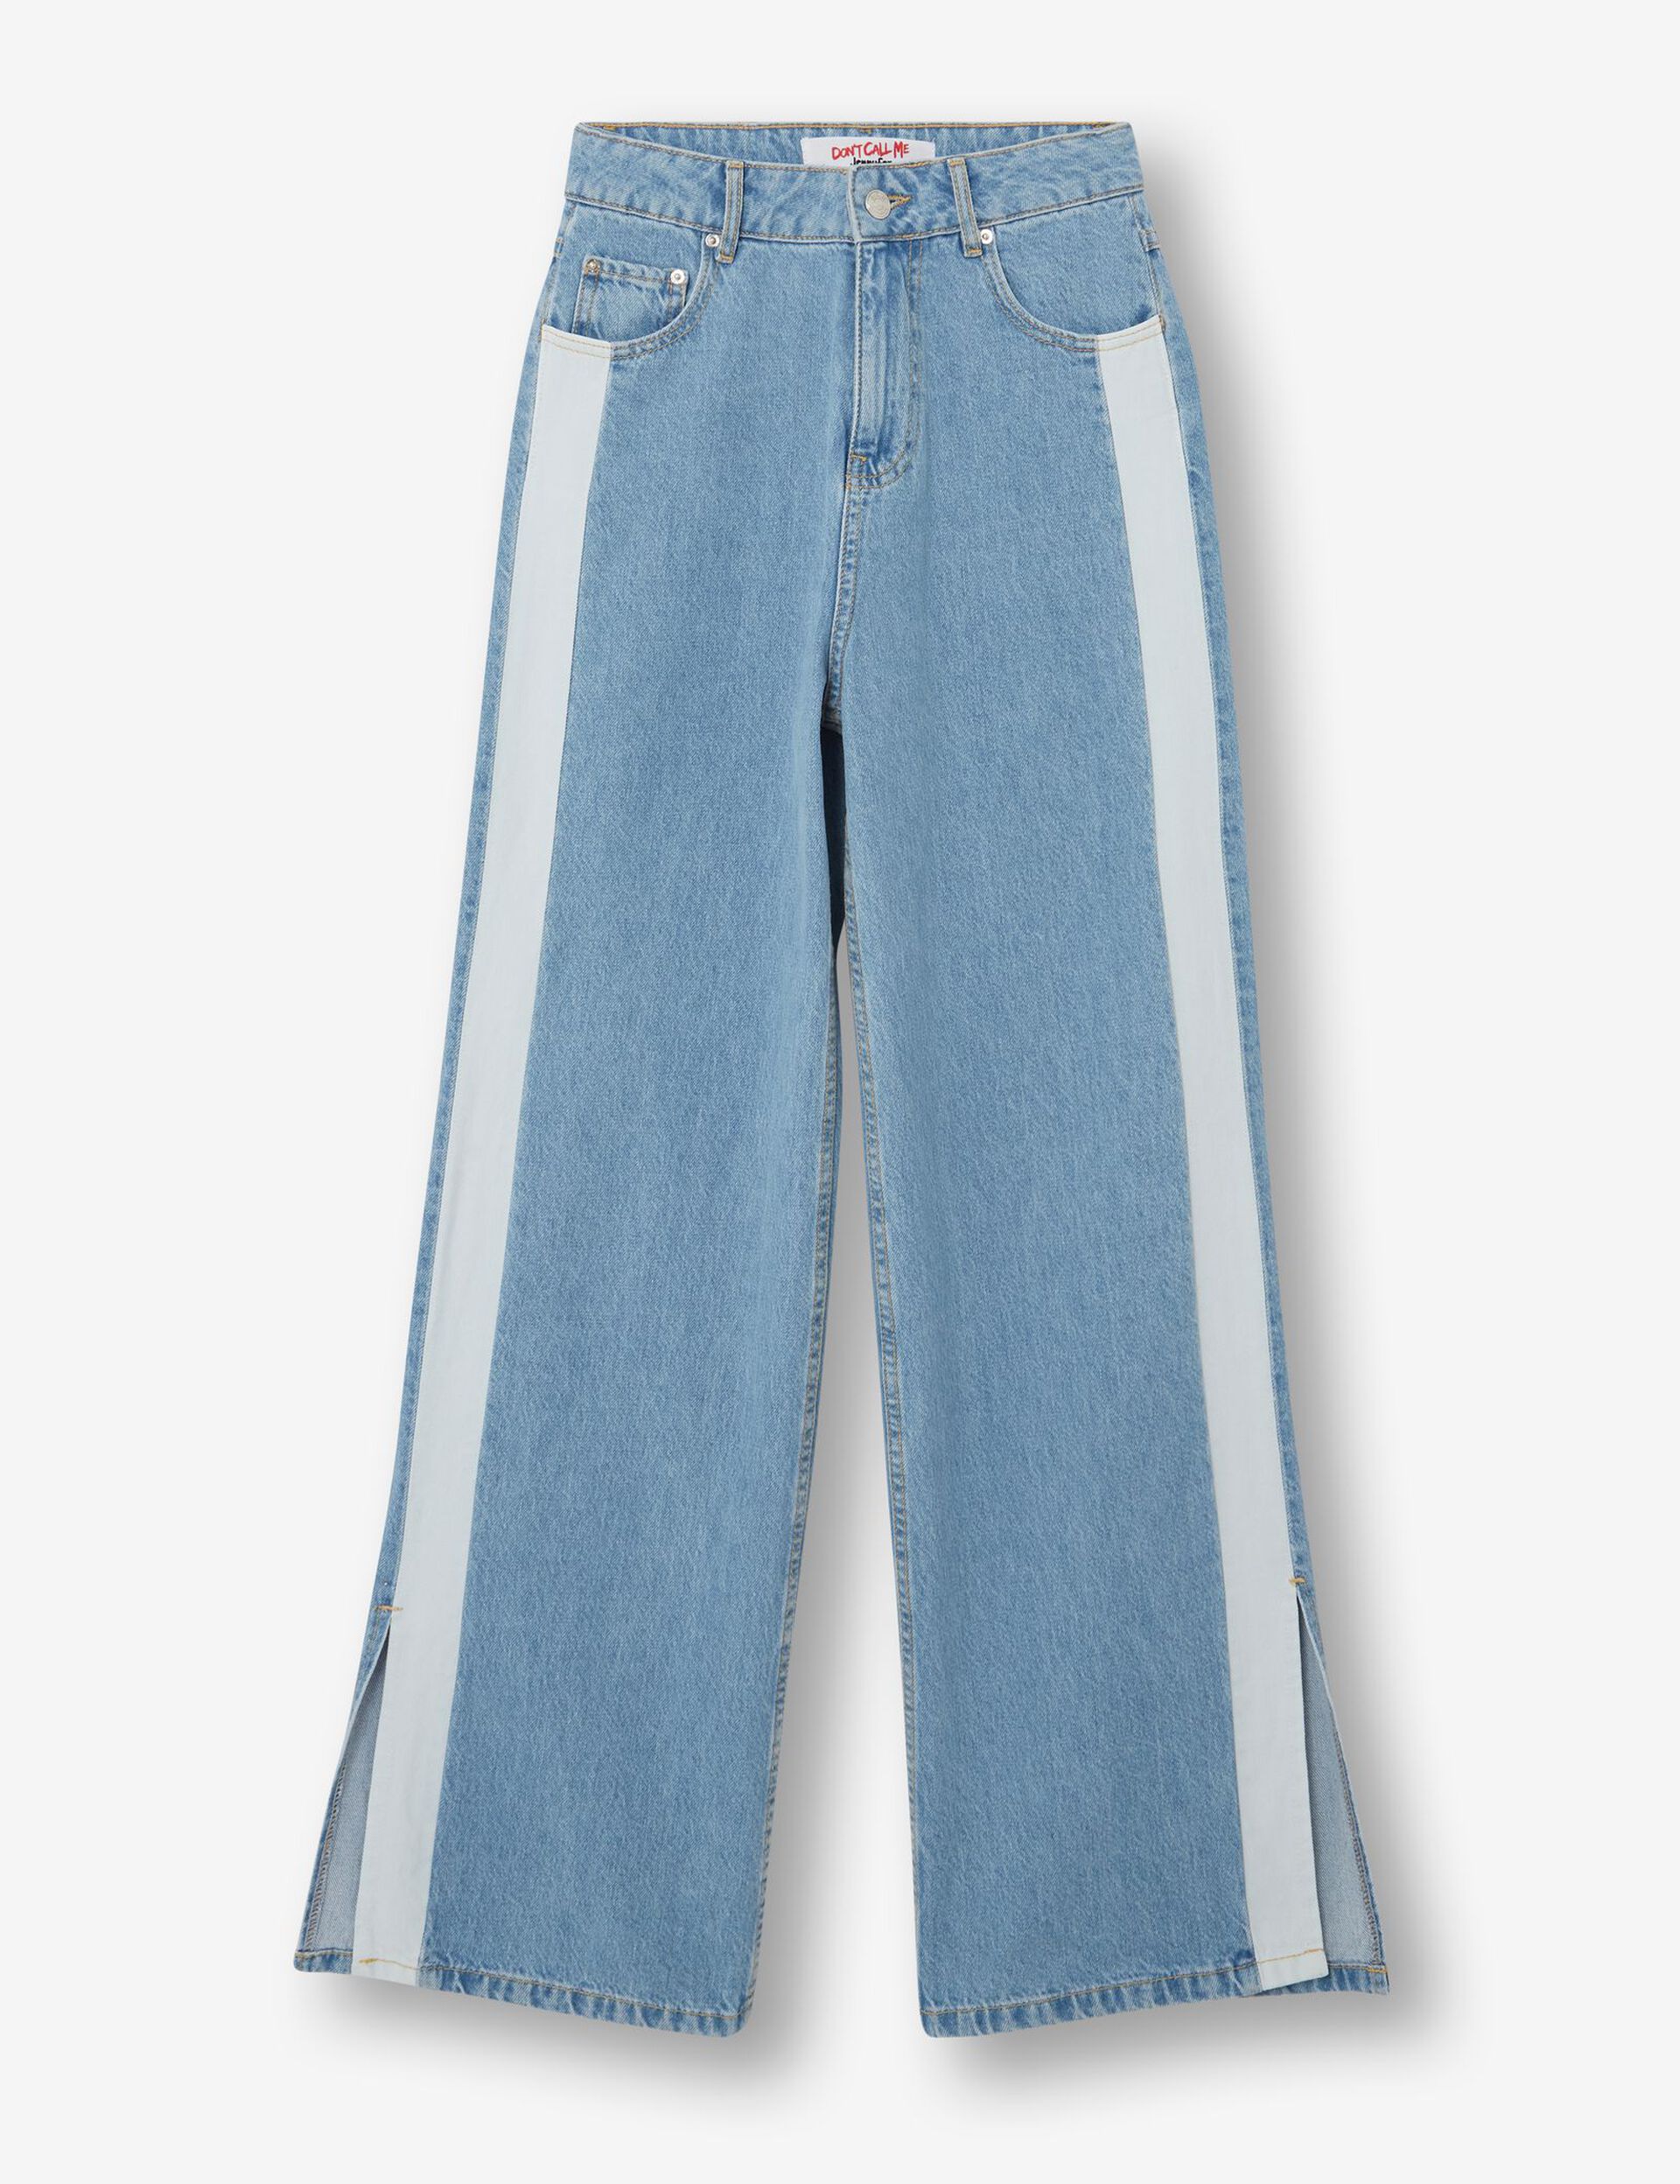 Dad jeans with trims